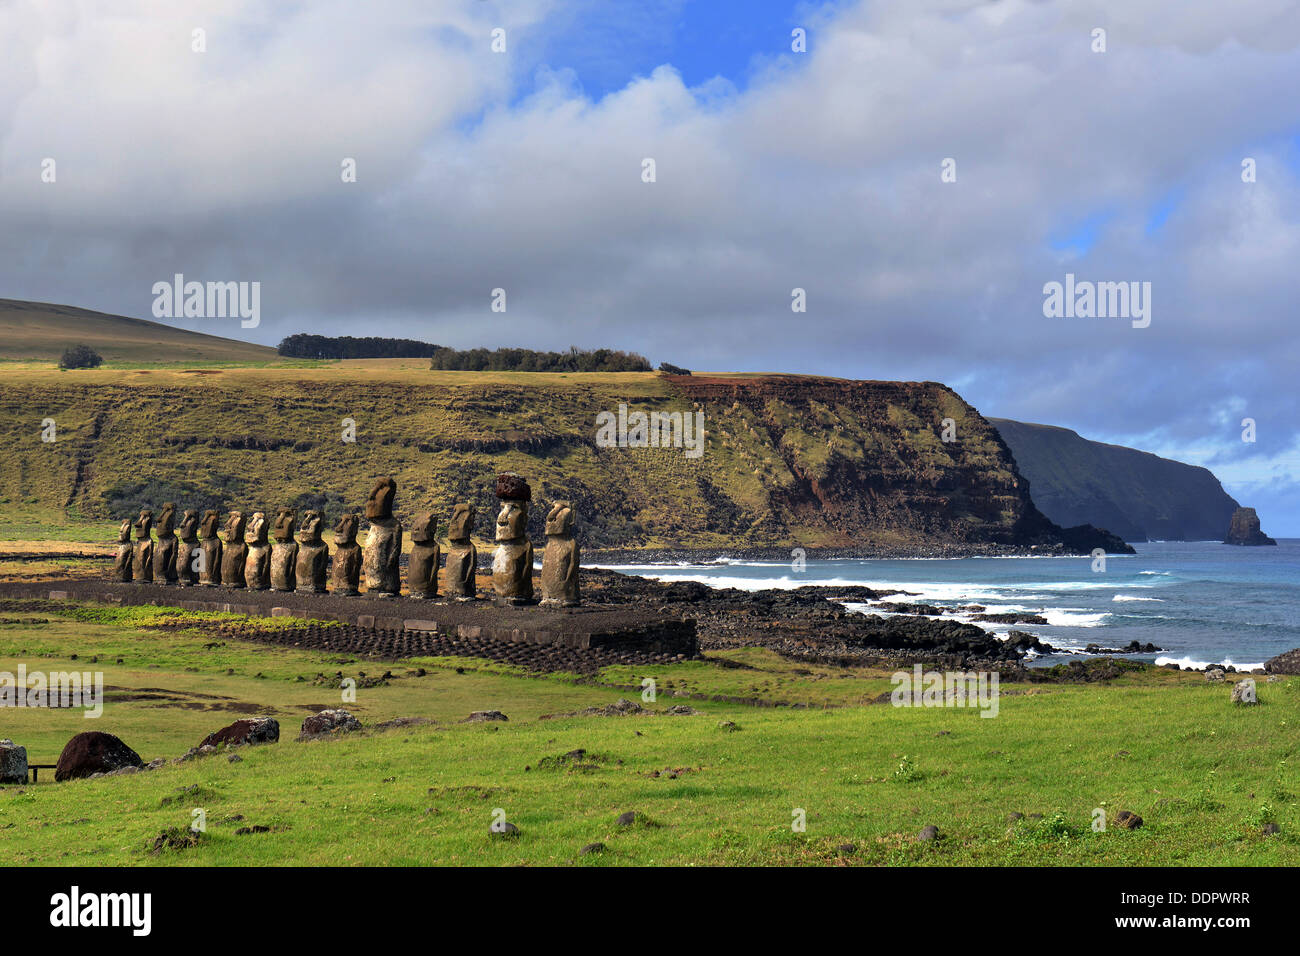 Moai monolithic human figures carved by the Rapa Nui on Easter Island Stock Photo